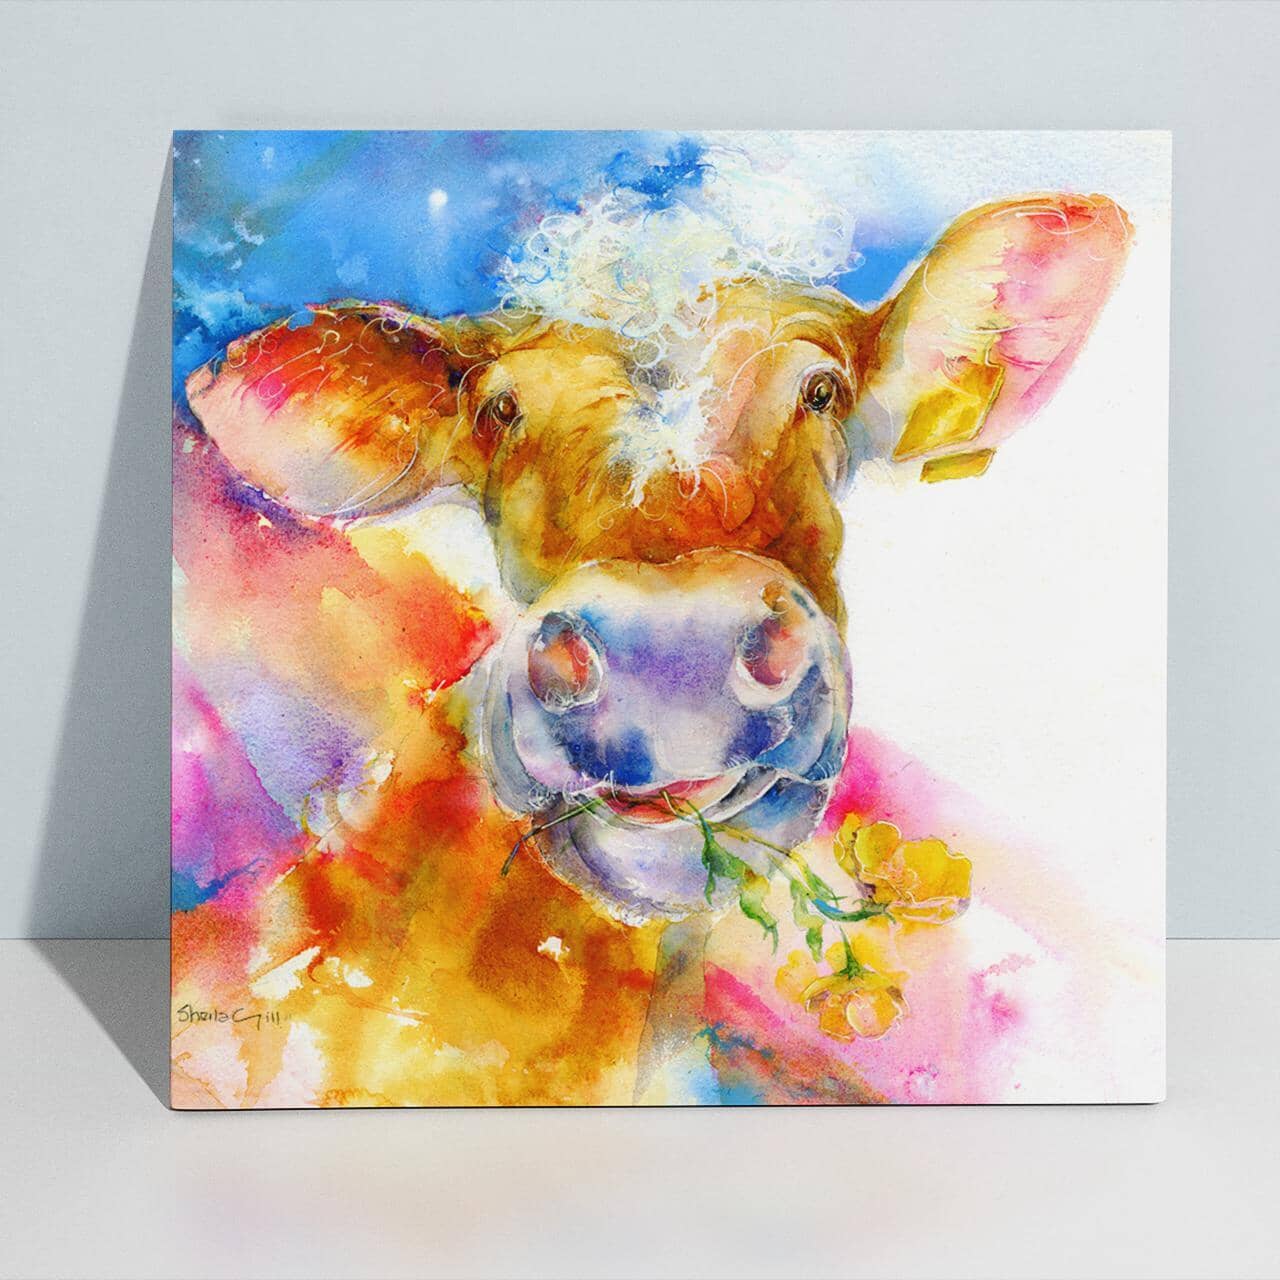 Buttercup the Cow - Brown and White Cow Canvas Art Print designed by artist Sheila Gill
